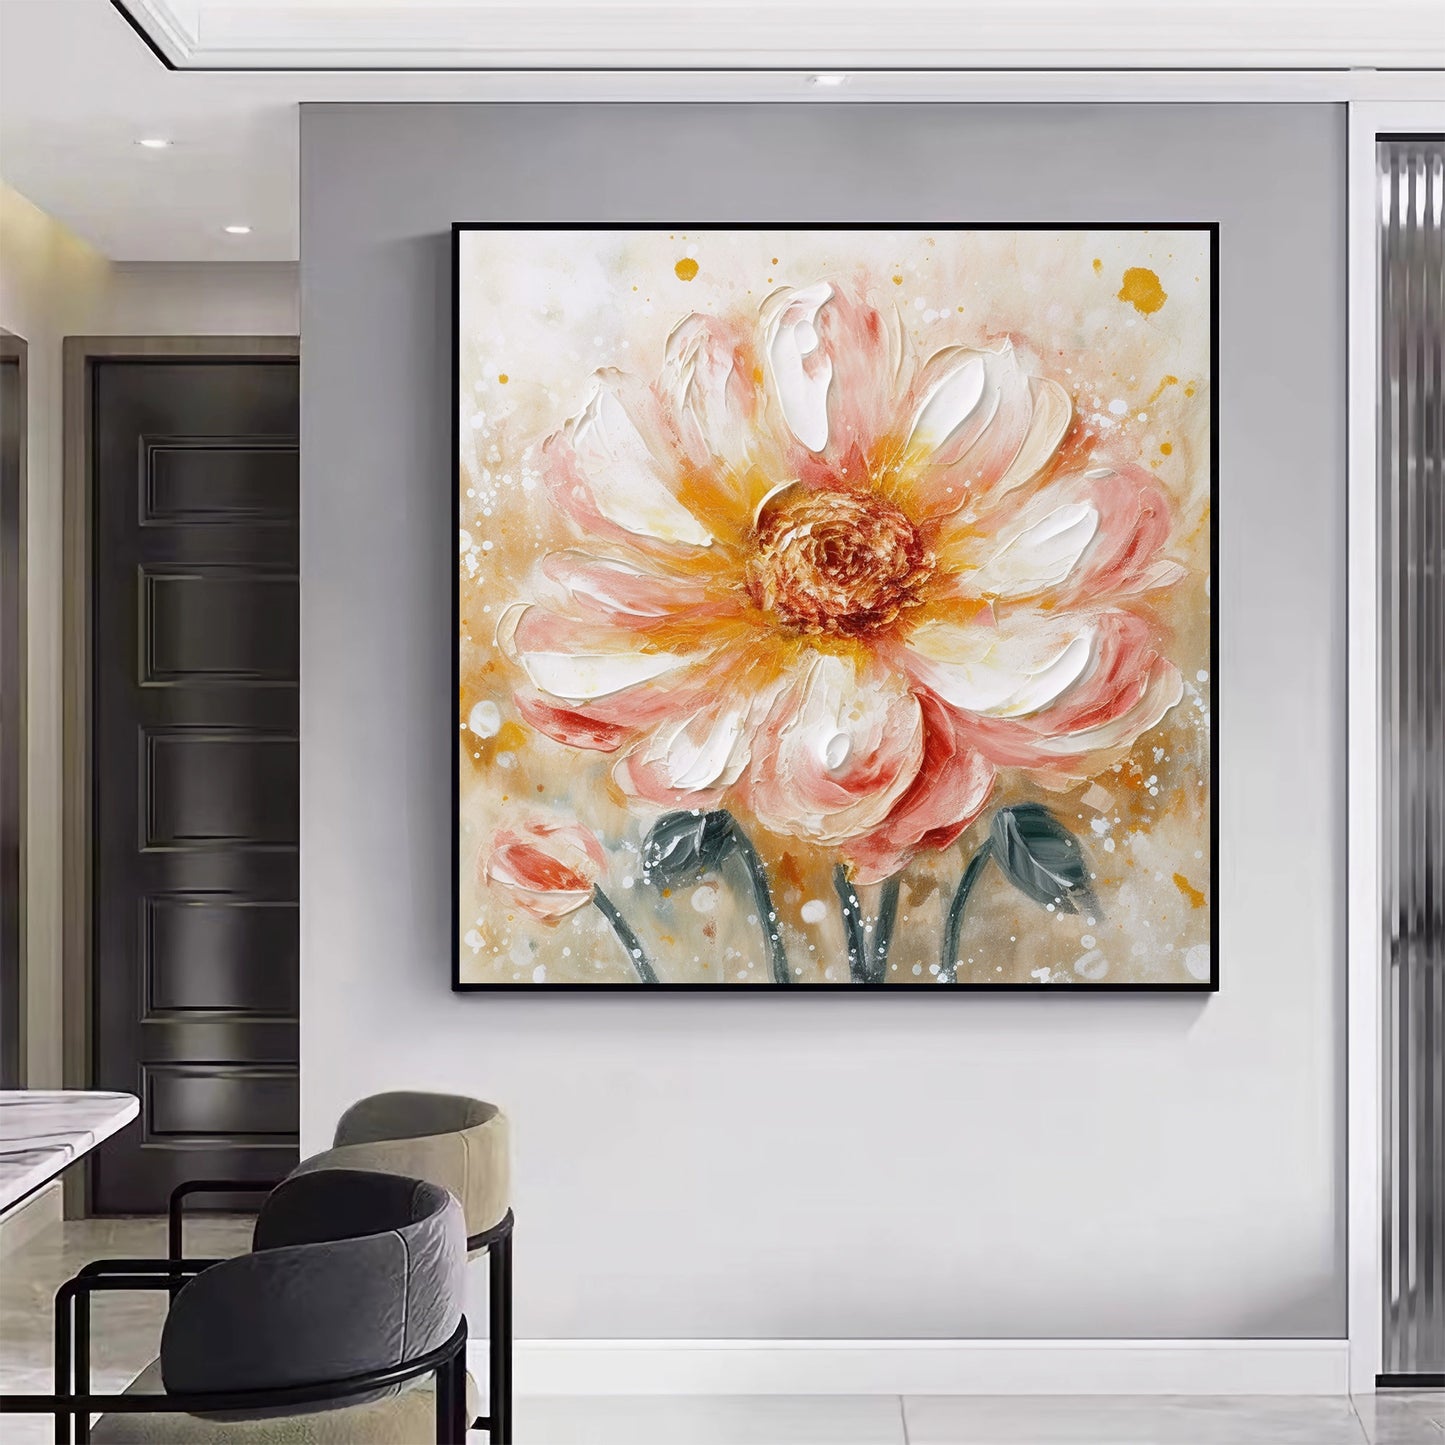 Abstract 3D Flower Oil Painting Texture Floral Wall Art Minimalist Living Room Decor Gift F0416A2310